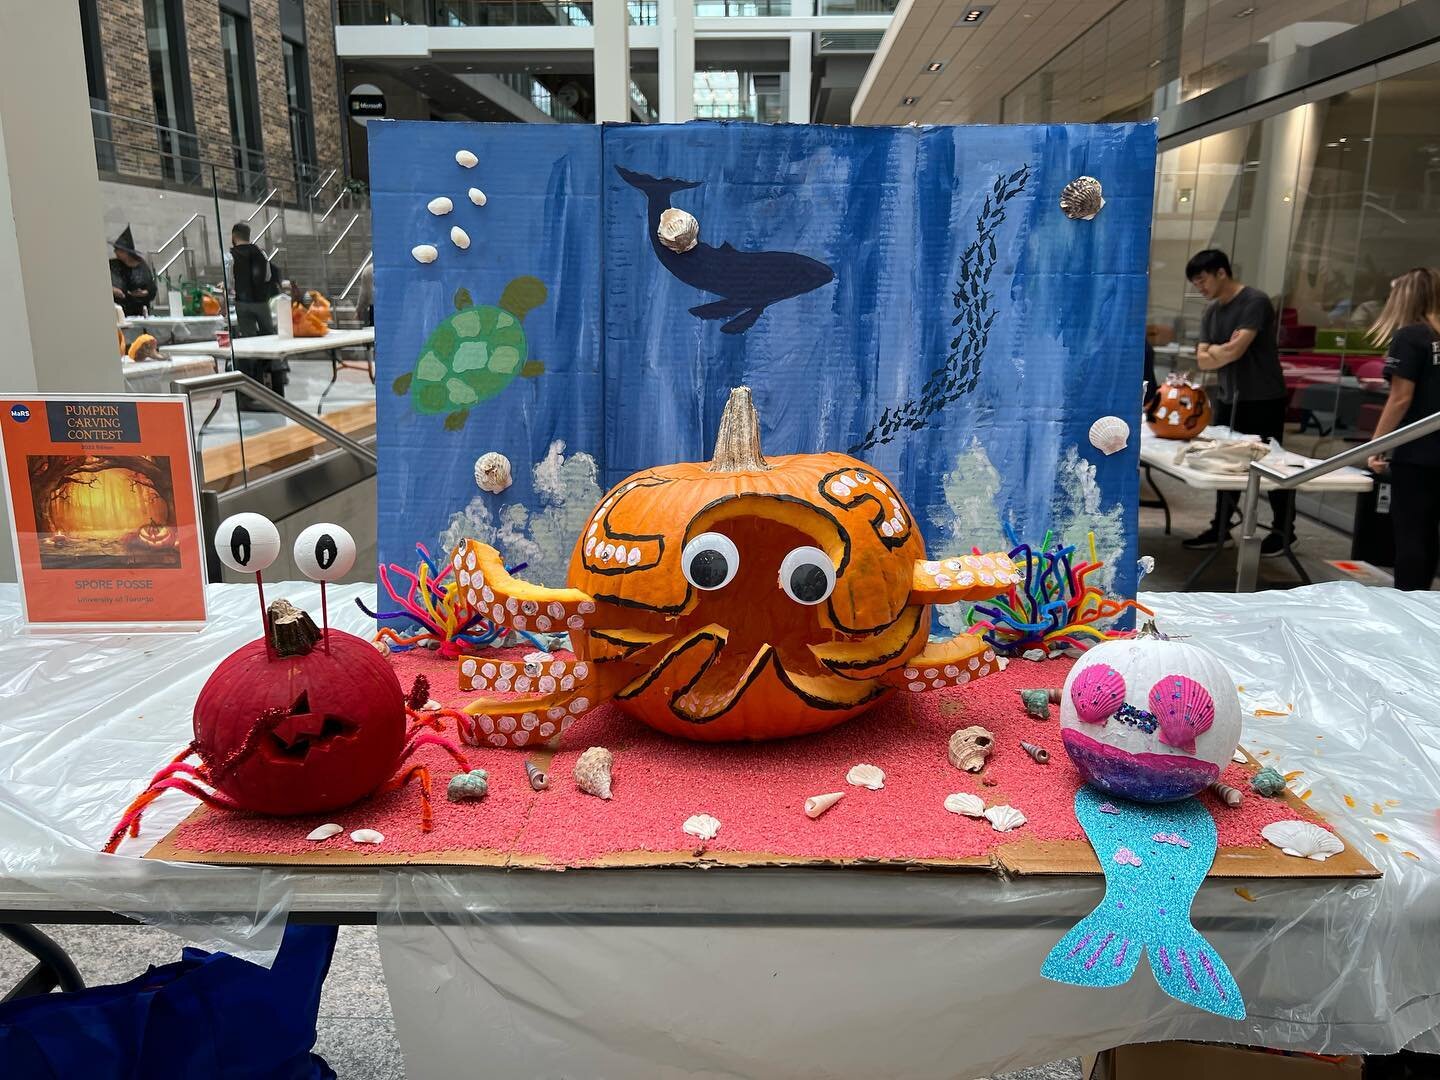 The Reinke lab is back with subpar carving skills and excellent gluing skills! Under the sea 🌊 🐠 🐙. Not sponsored by Dollarama (but could be?)